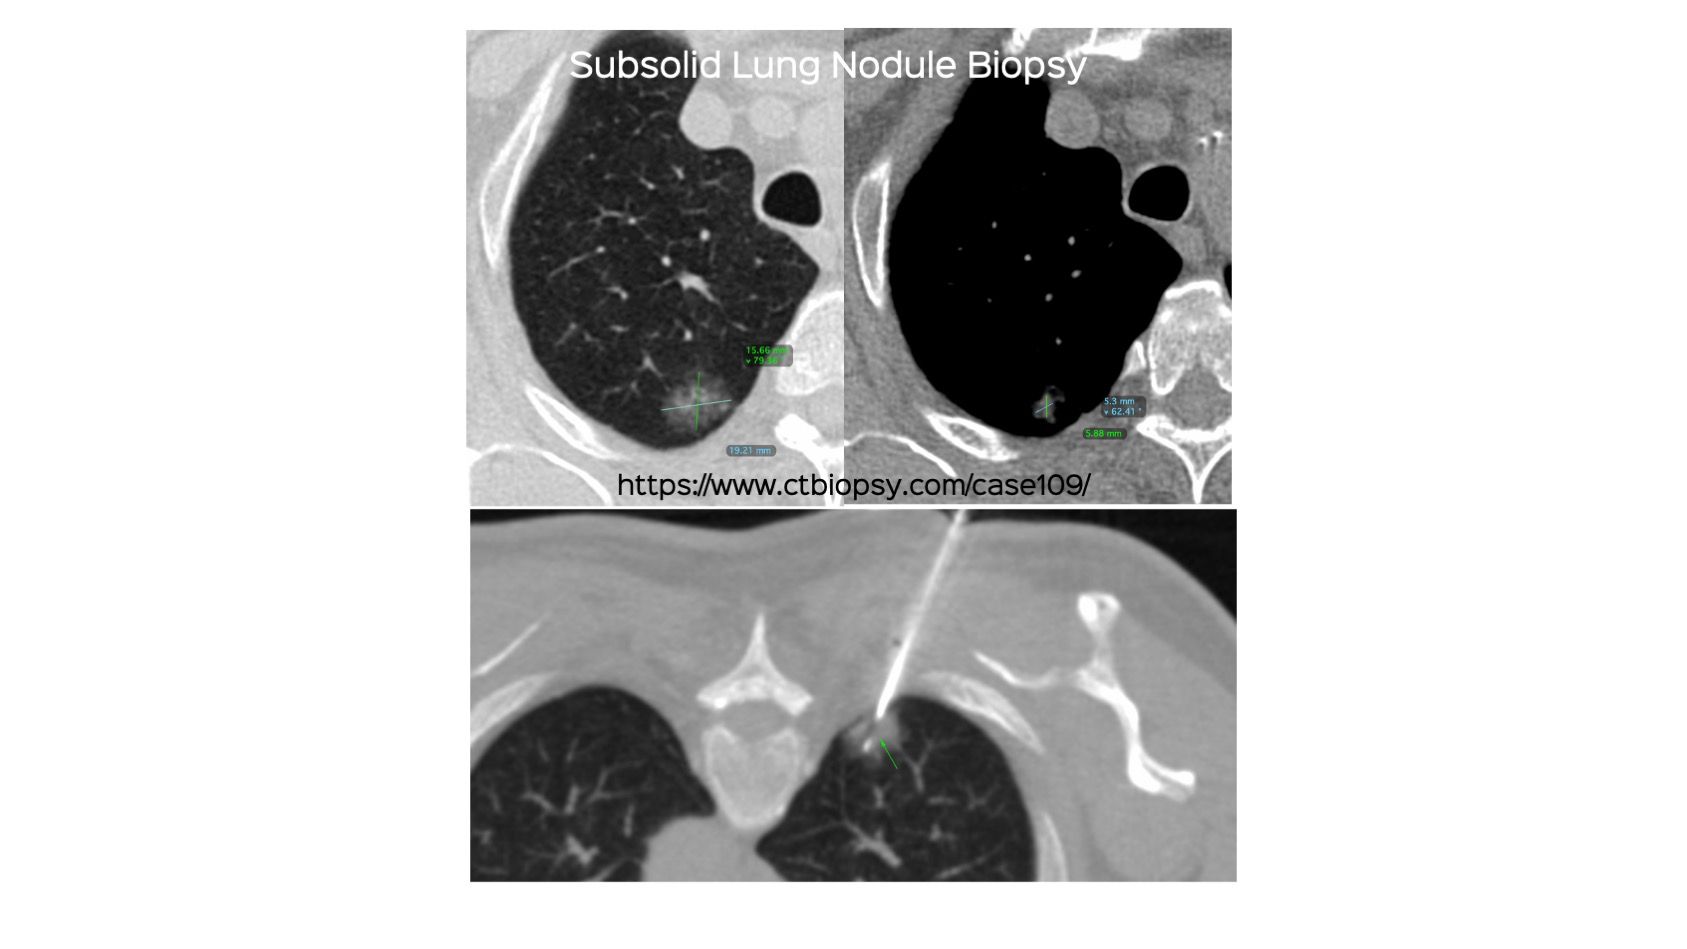 Case 109: Subsolid Lung Nodule Biopsy